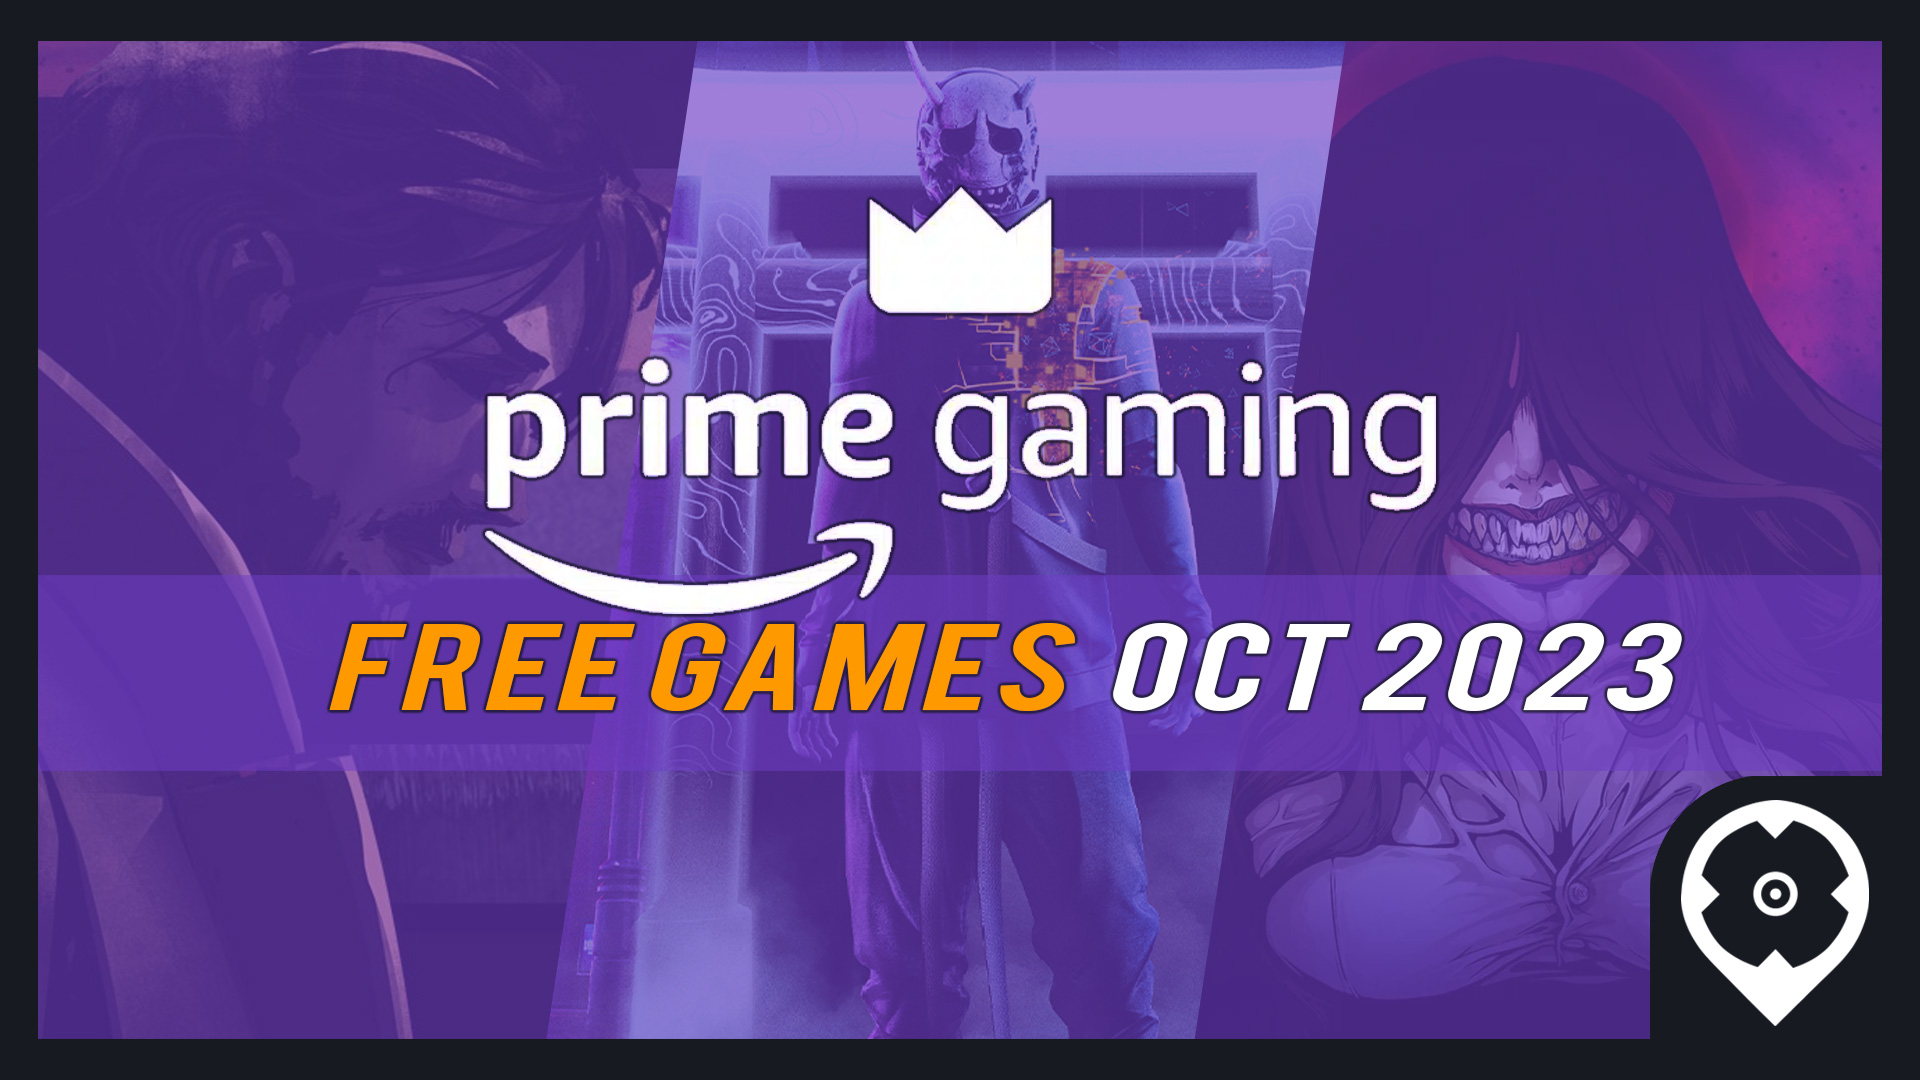 How To Claim Prime Gaming Packs on FC 24! Prime Gaming Pack 1